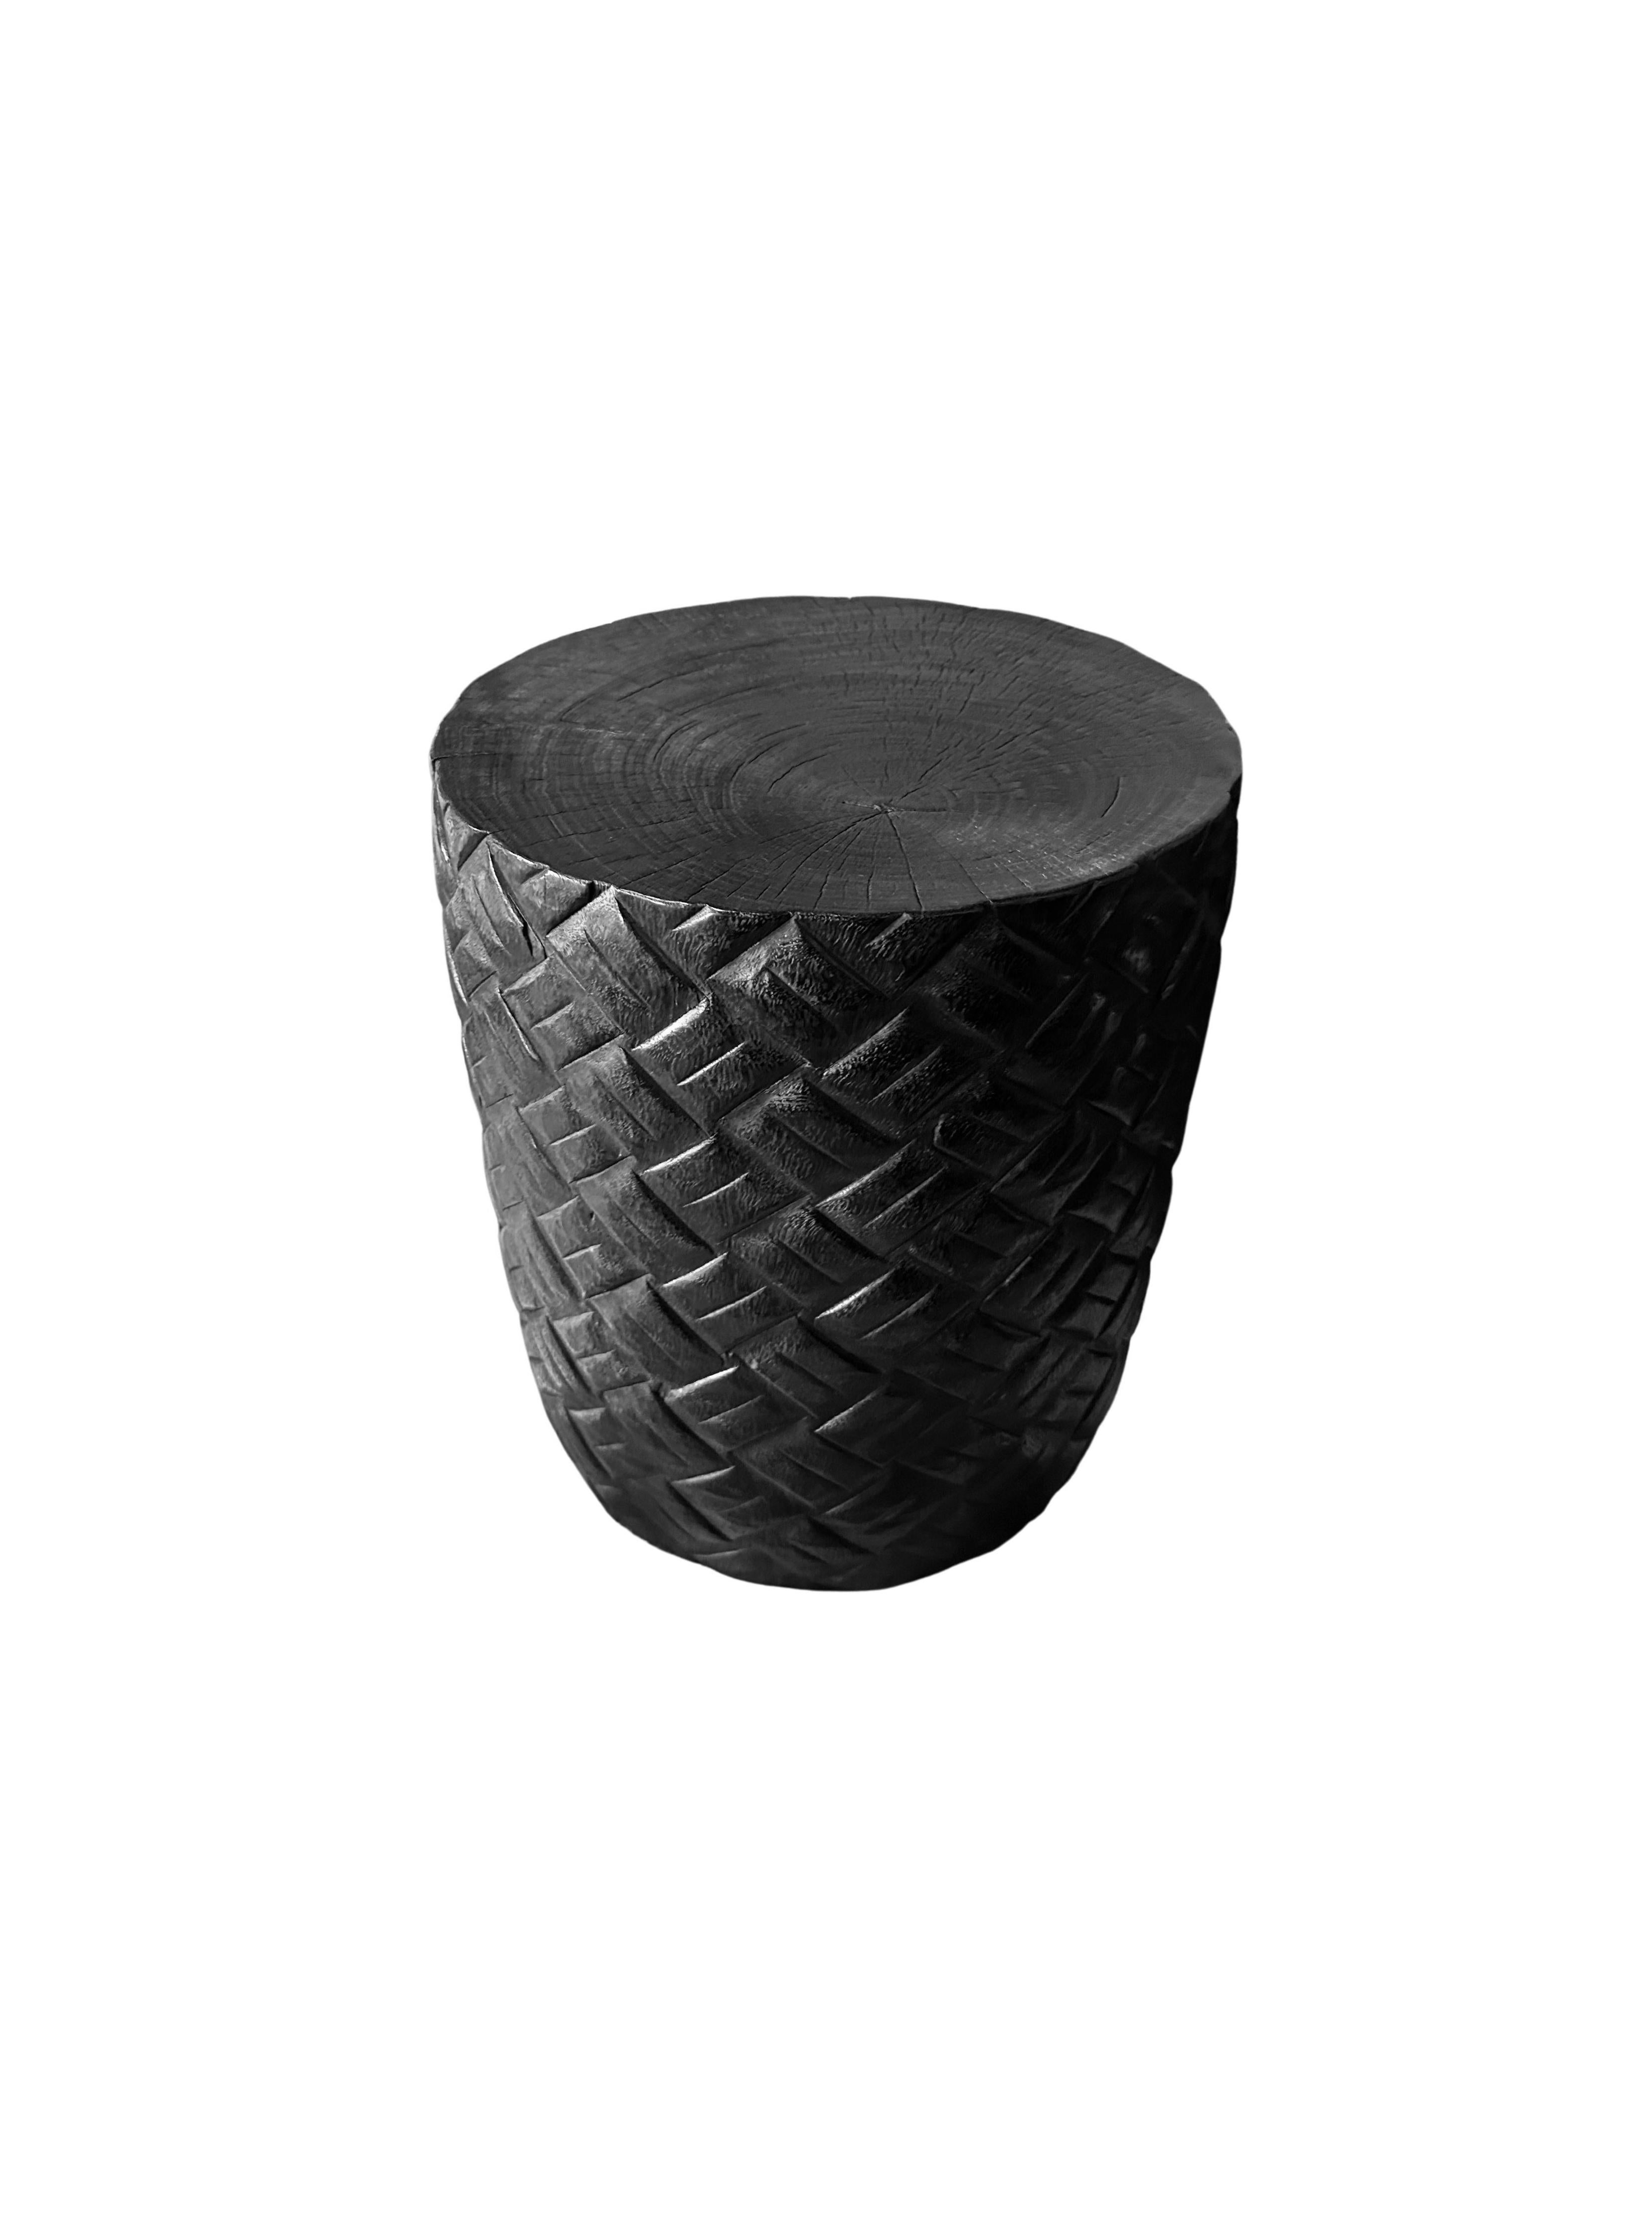 A wonderfully sculptural round side table. Its neutral pigments make it perfect for any space. A uniquely sculptural and versatile piece certain to invoke conversation. It was crafted from a solid block of mango wood and has a smooth texture burnt